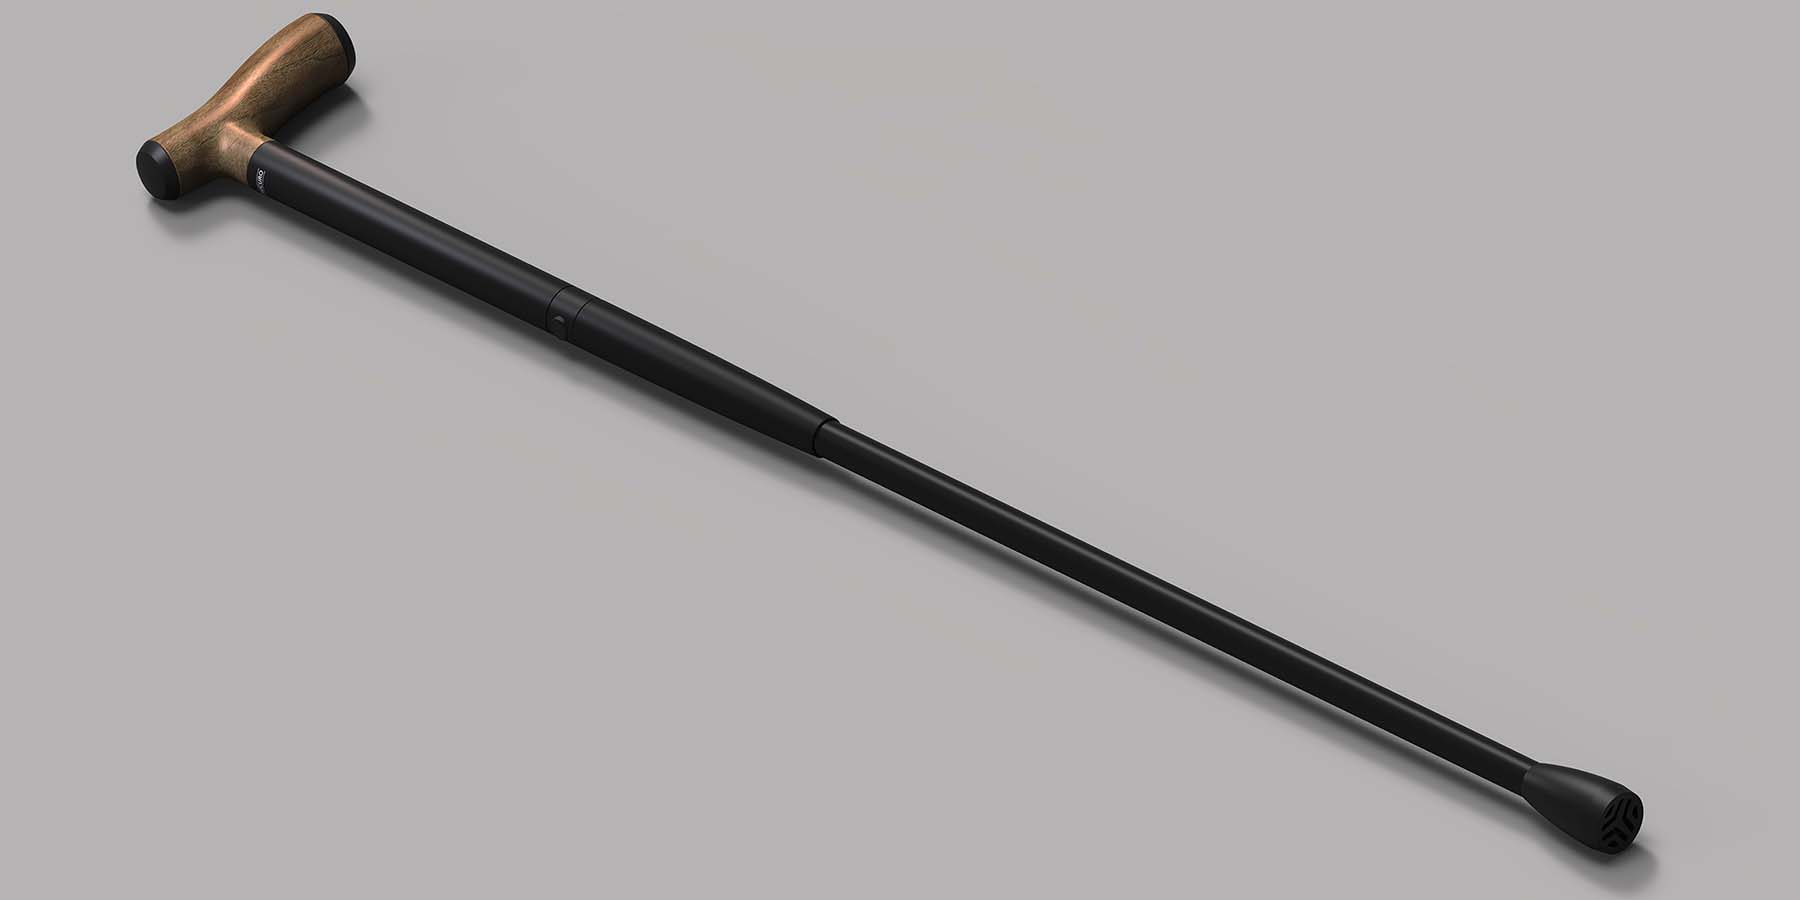 A black adjustable height walking stick with an American walnut handle with a tapered top shaft, bottom shaft and ferrule